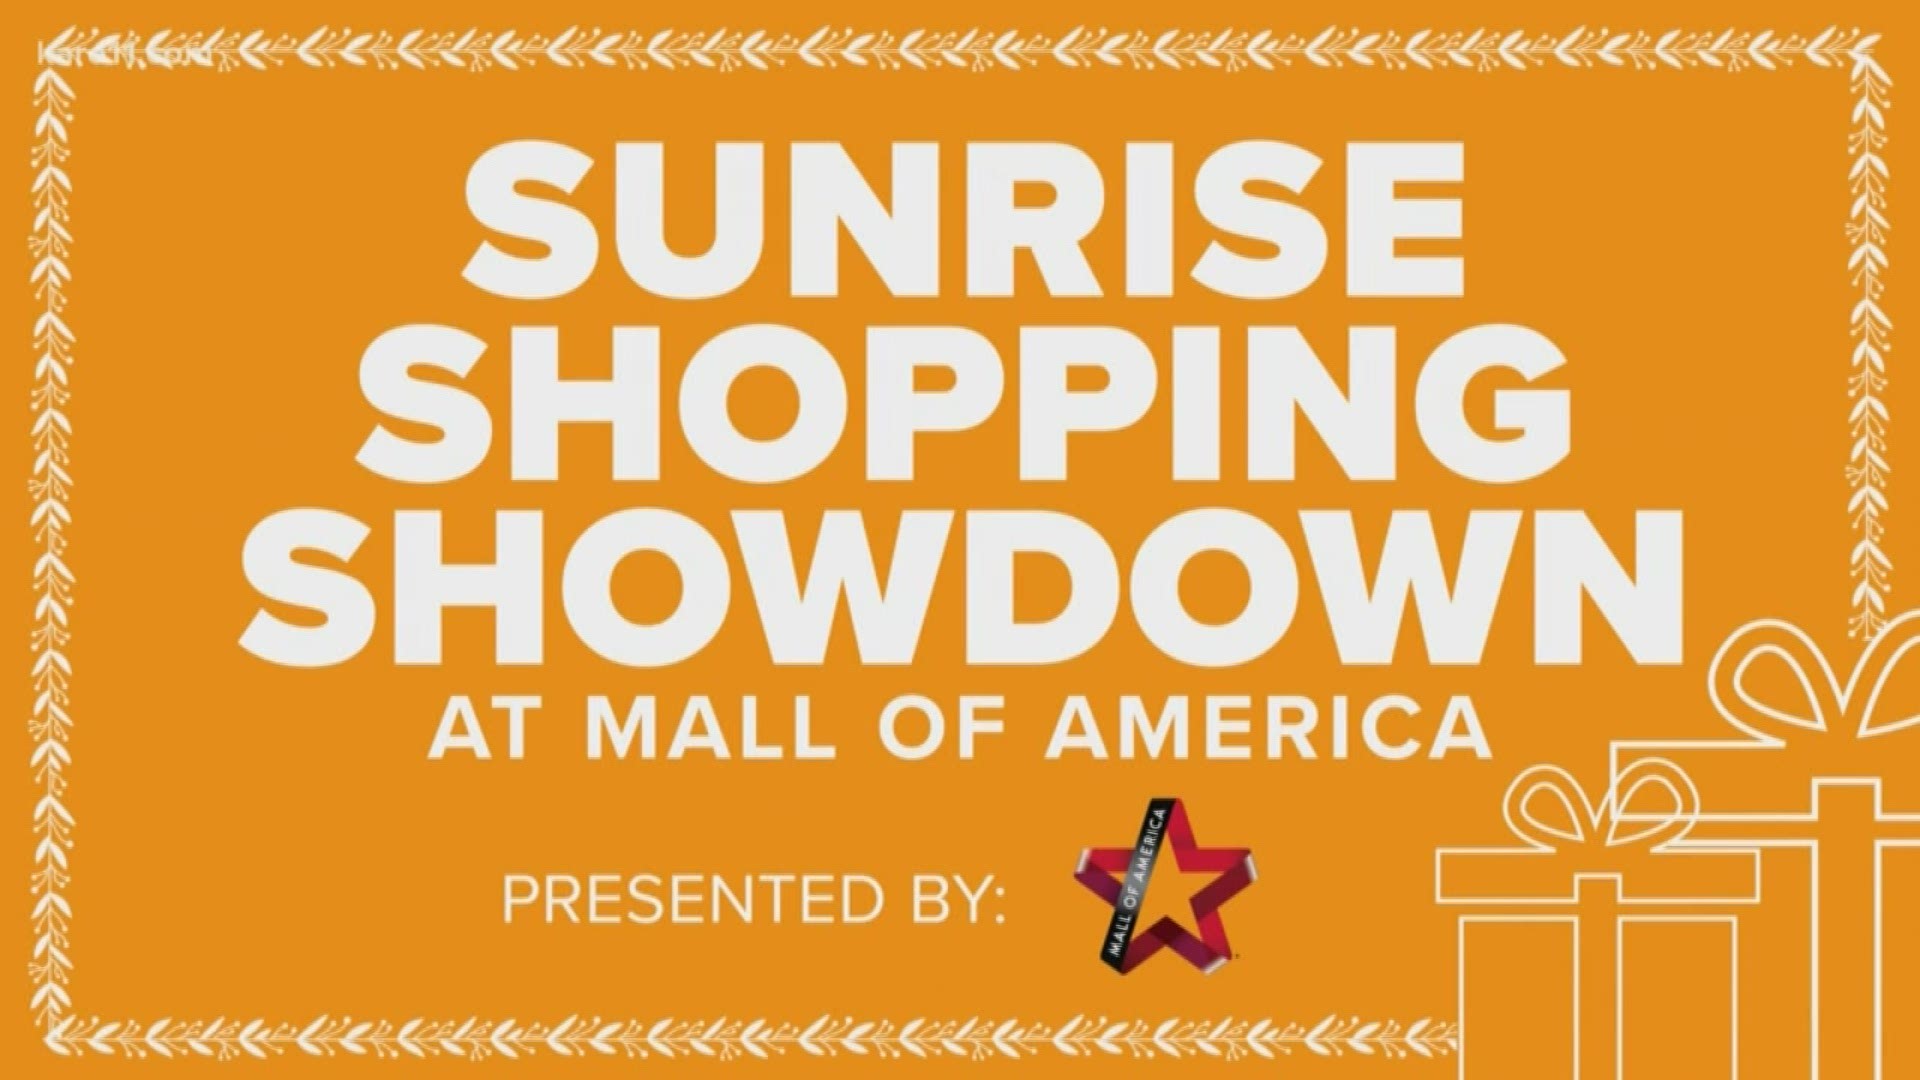 Have someone who is hard to shop for? The Sunrise team and Mall of America can help with that.